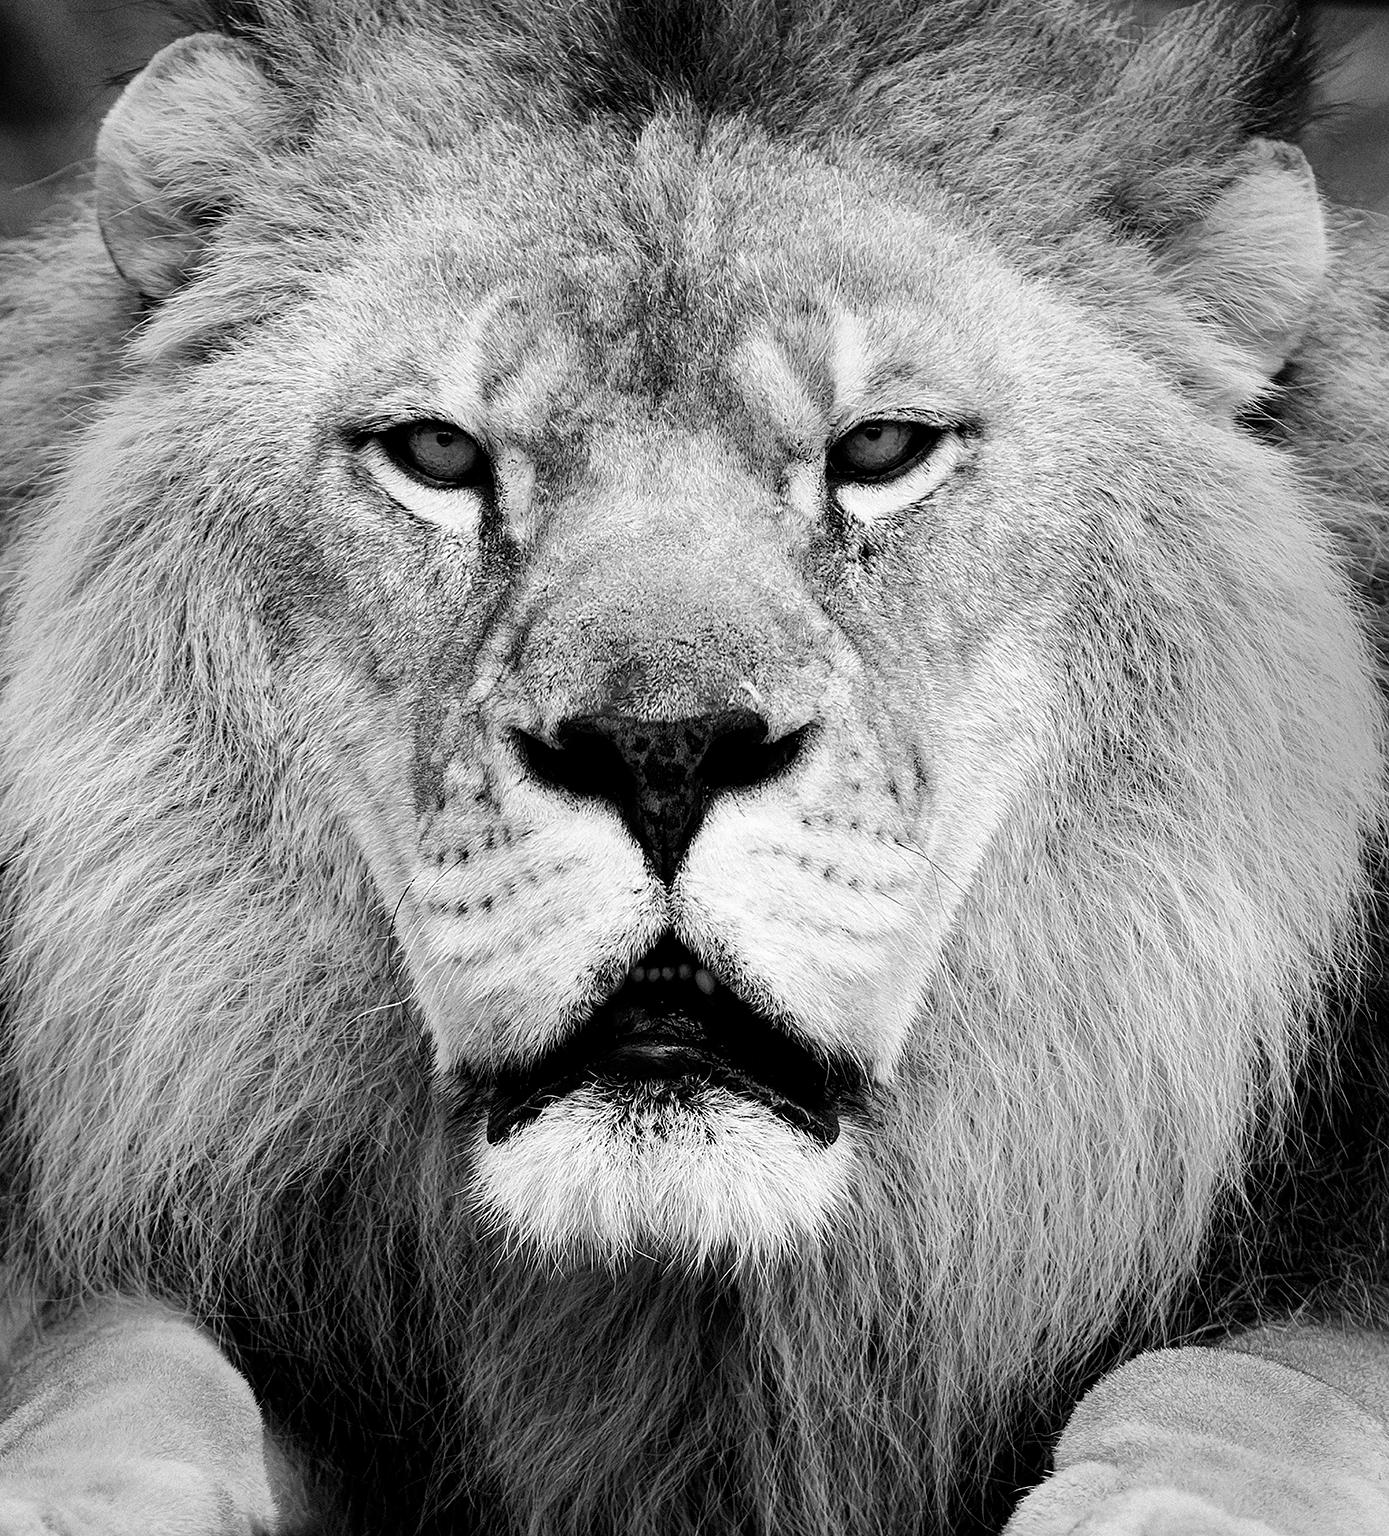 Shane Russeck Black and White Photograph - "Face Off"  36x48  - Black & White  Fine Art Photography, Lion Photograph Africa